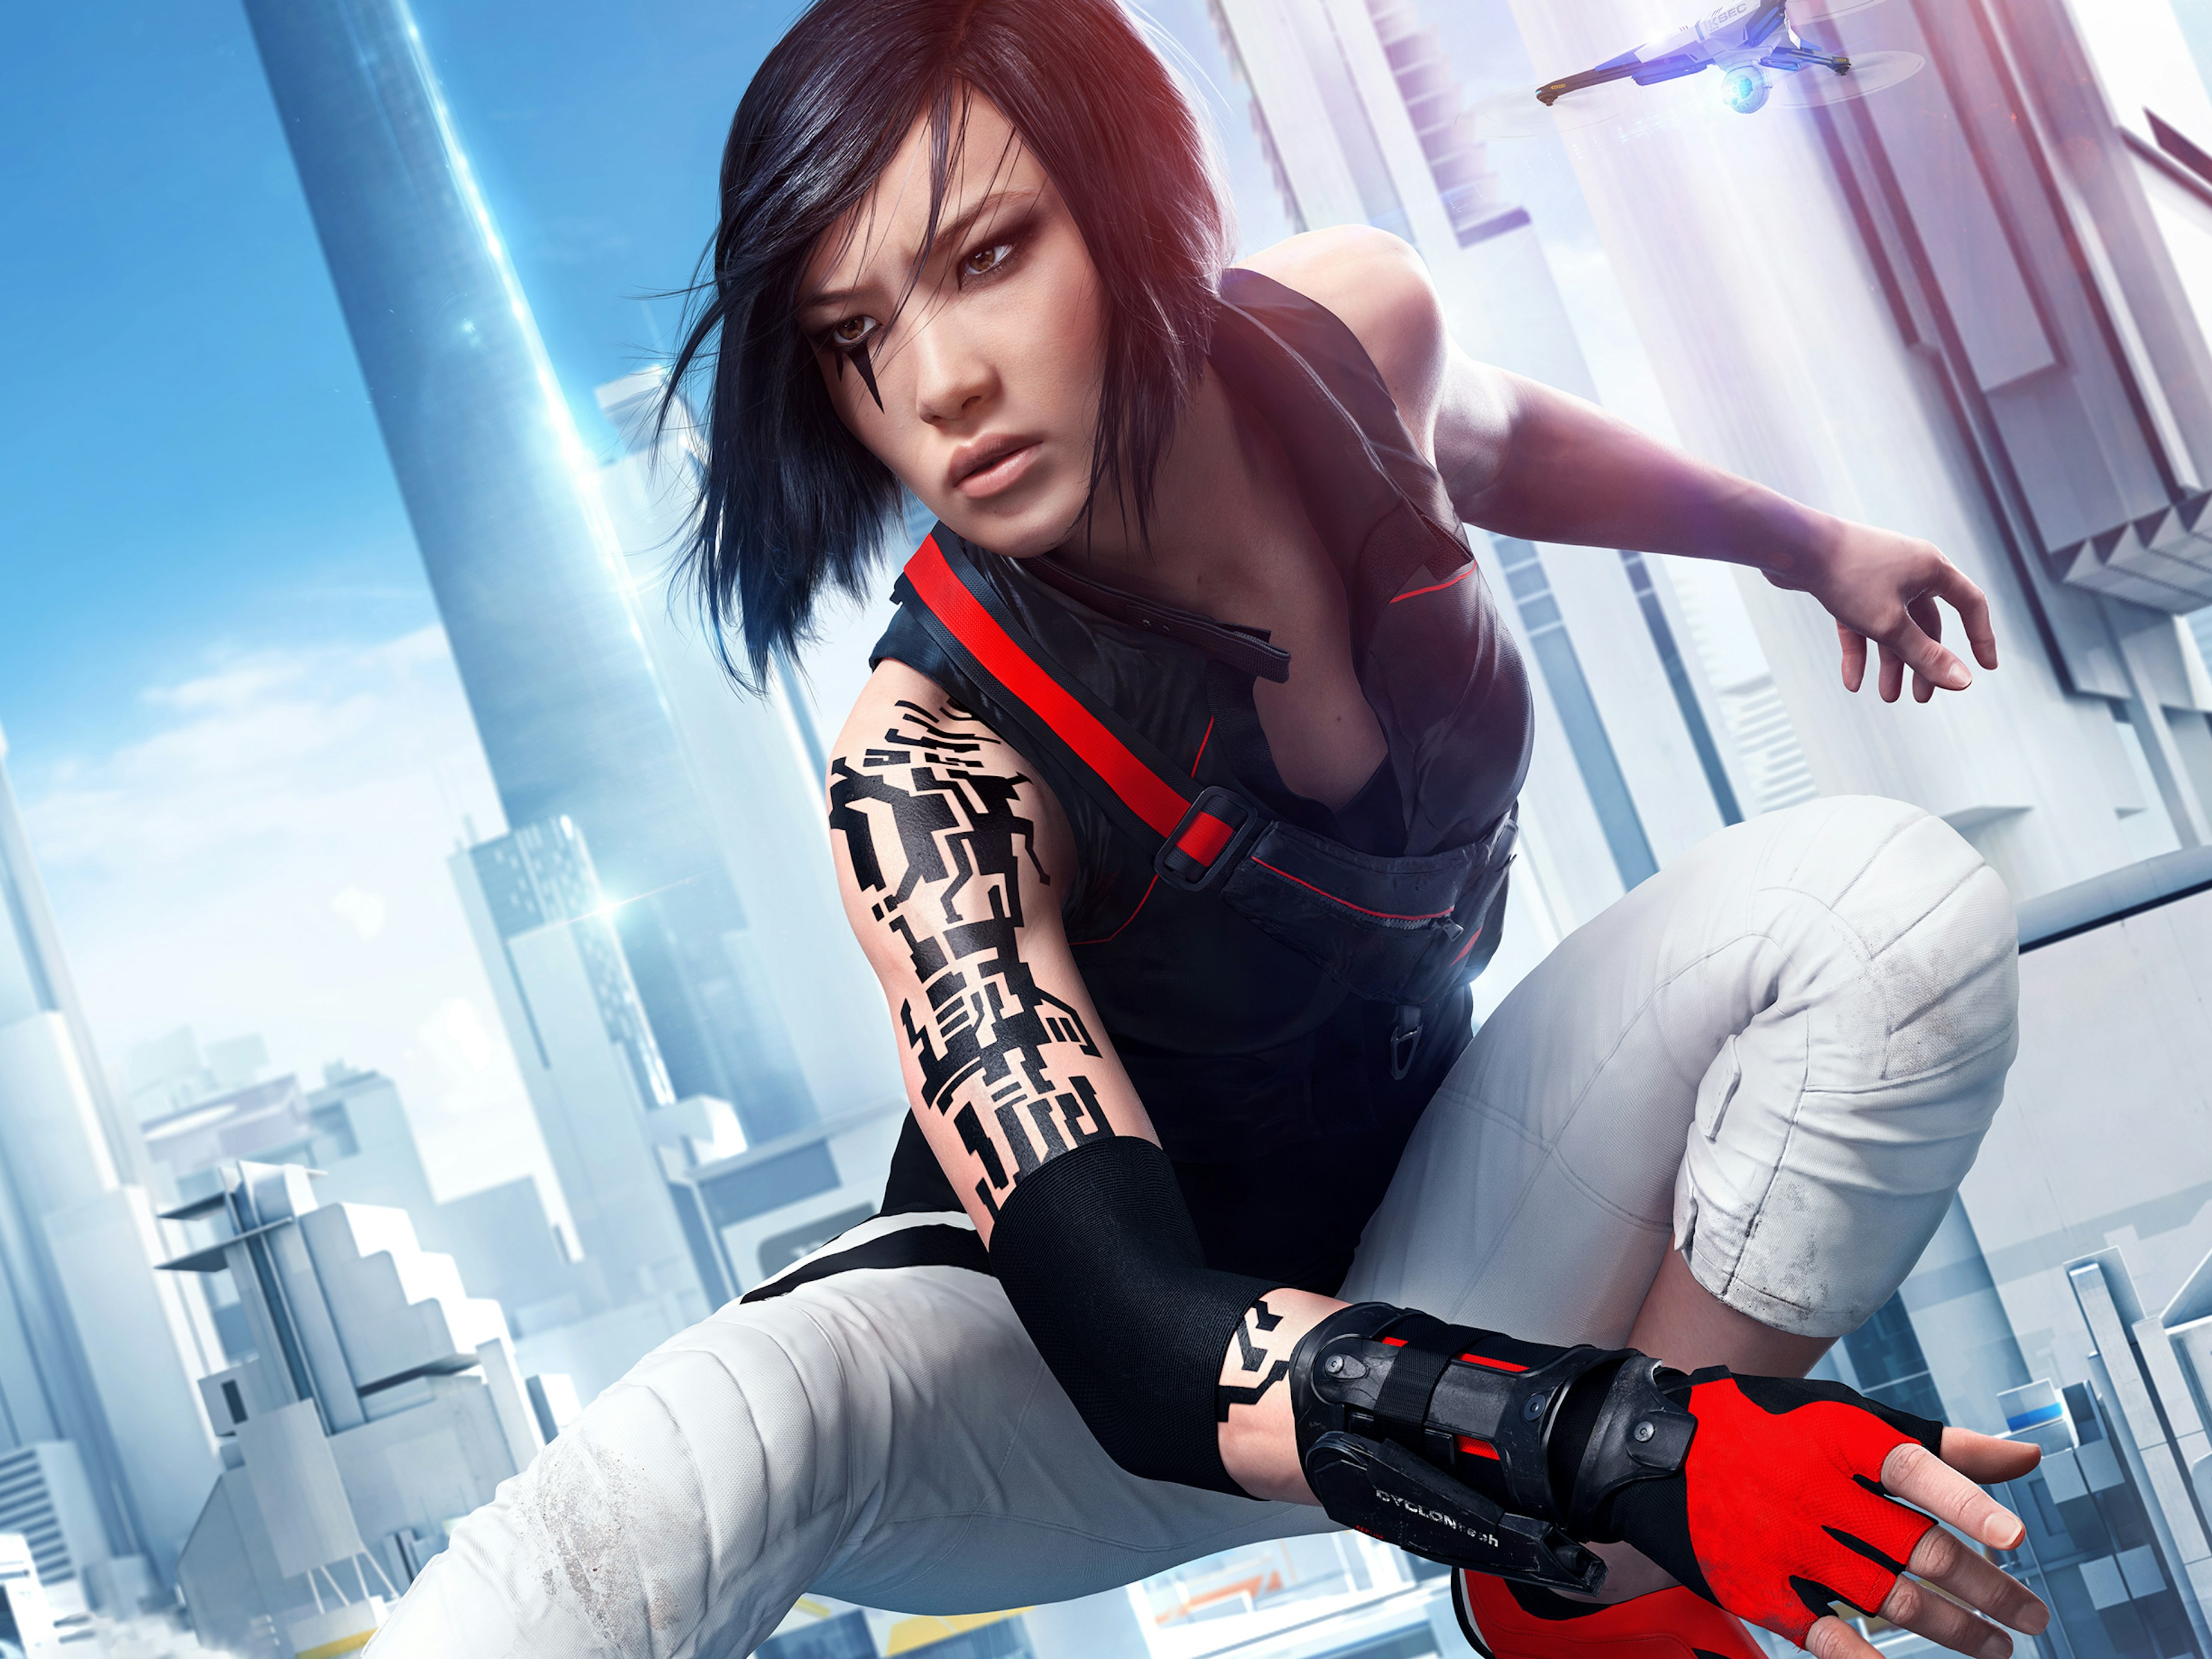 mirror-s-edge-catalyst-story-trailer-proves-it-s-more-than-a-sleek